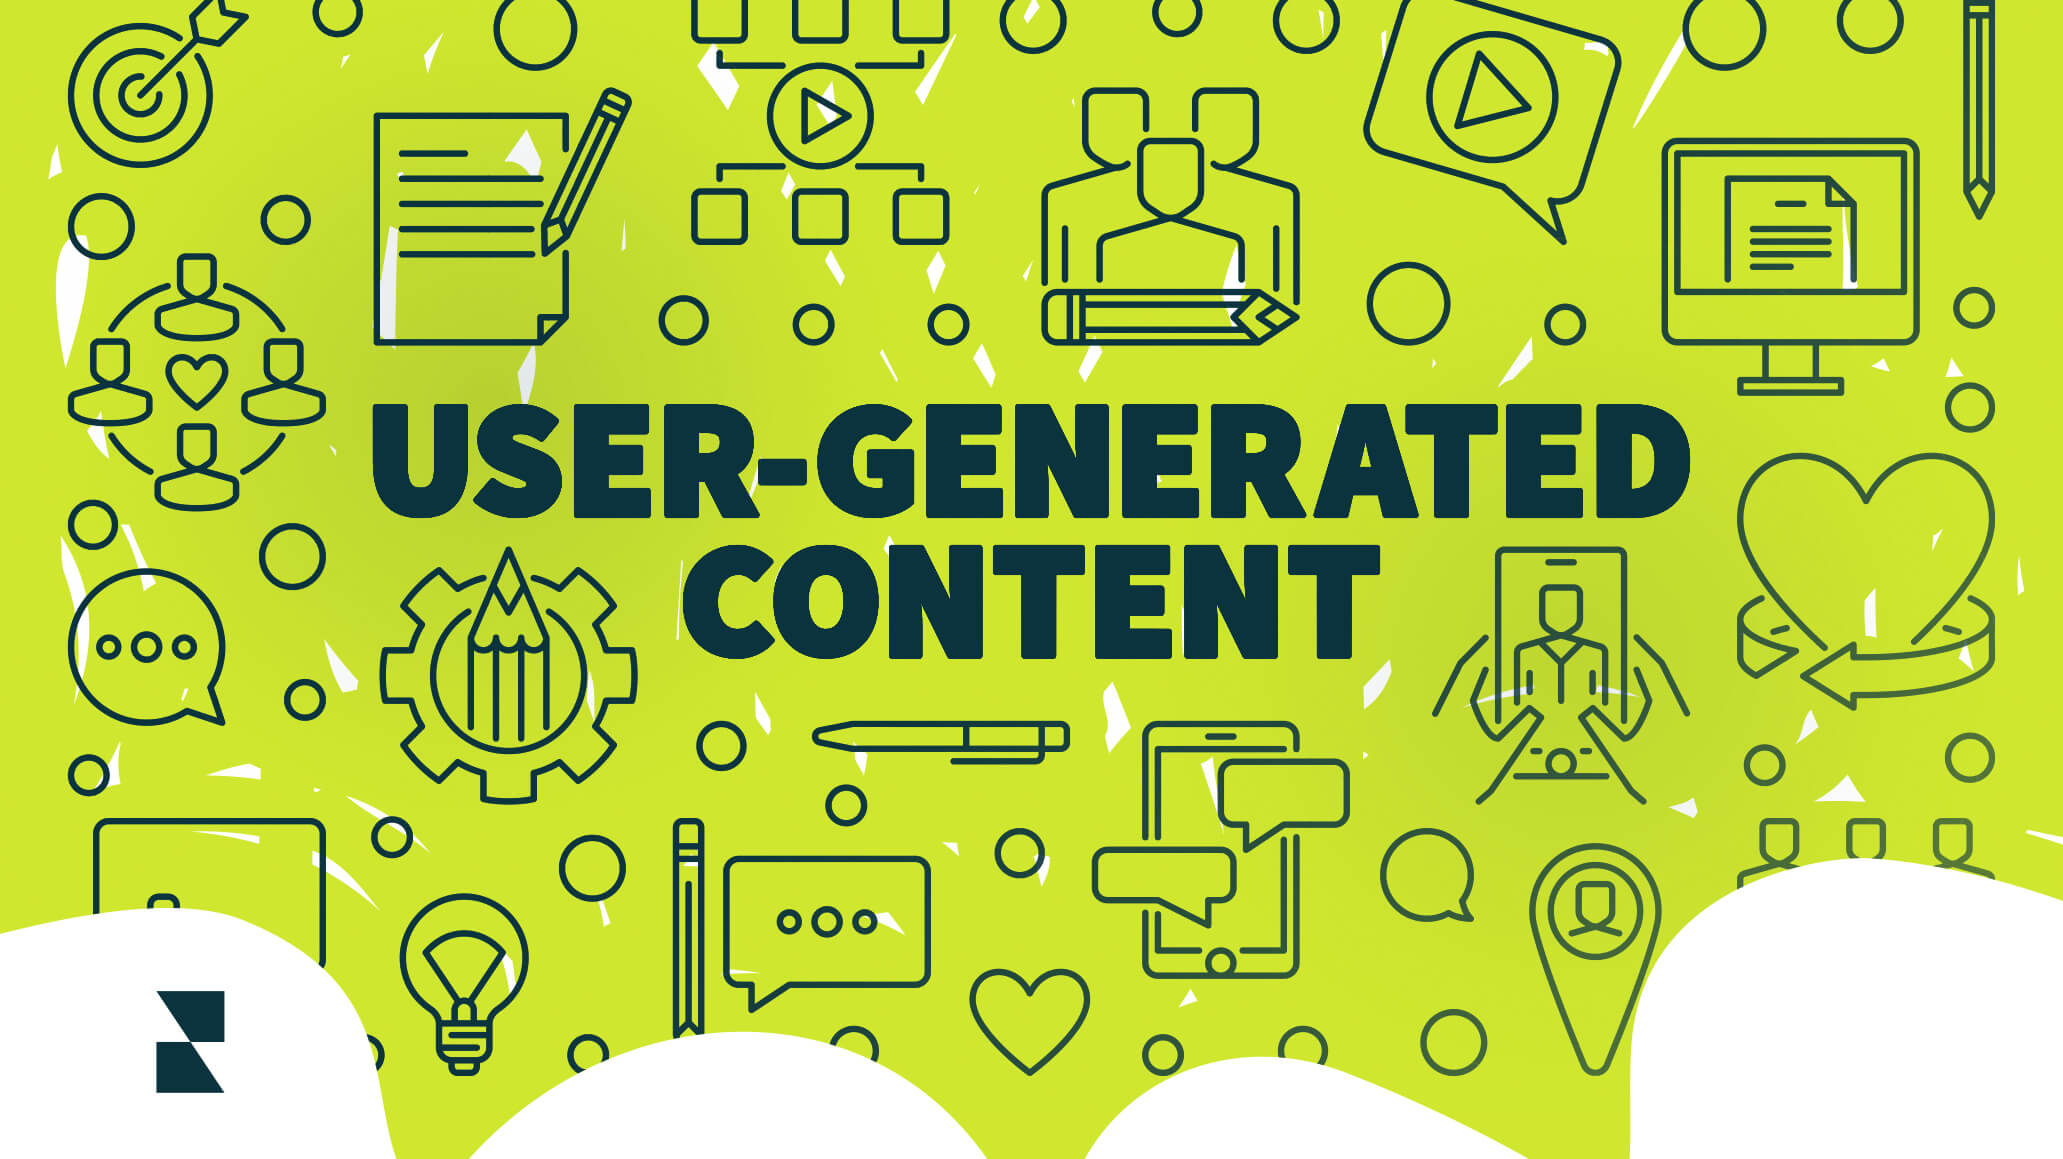 Image for Join the Social Conversation: 10 Tips for Leveraging User-Generated Content